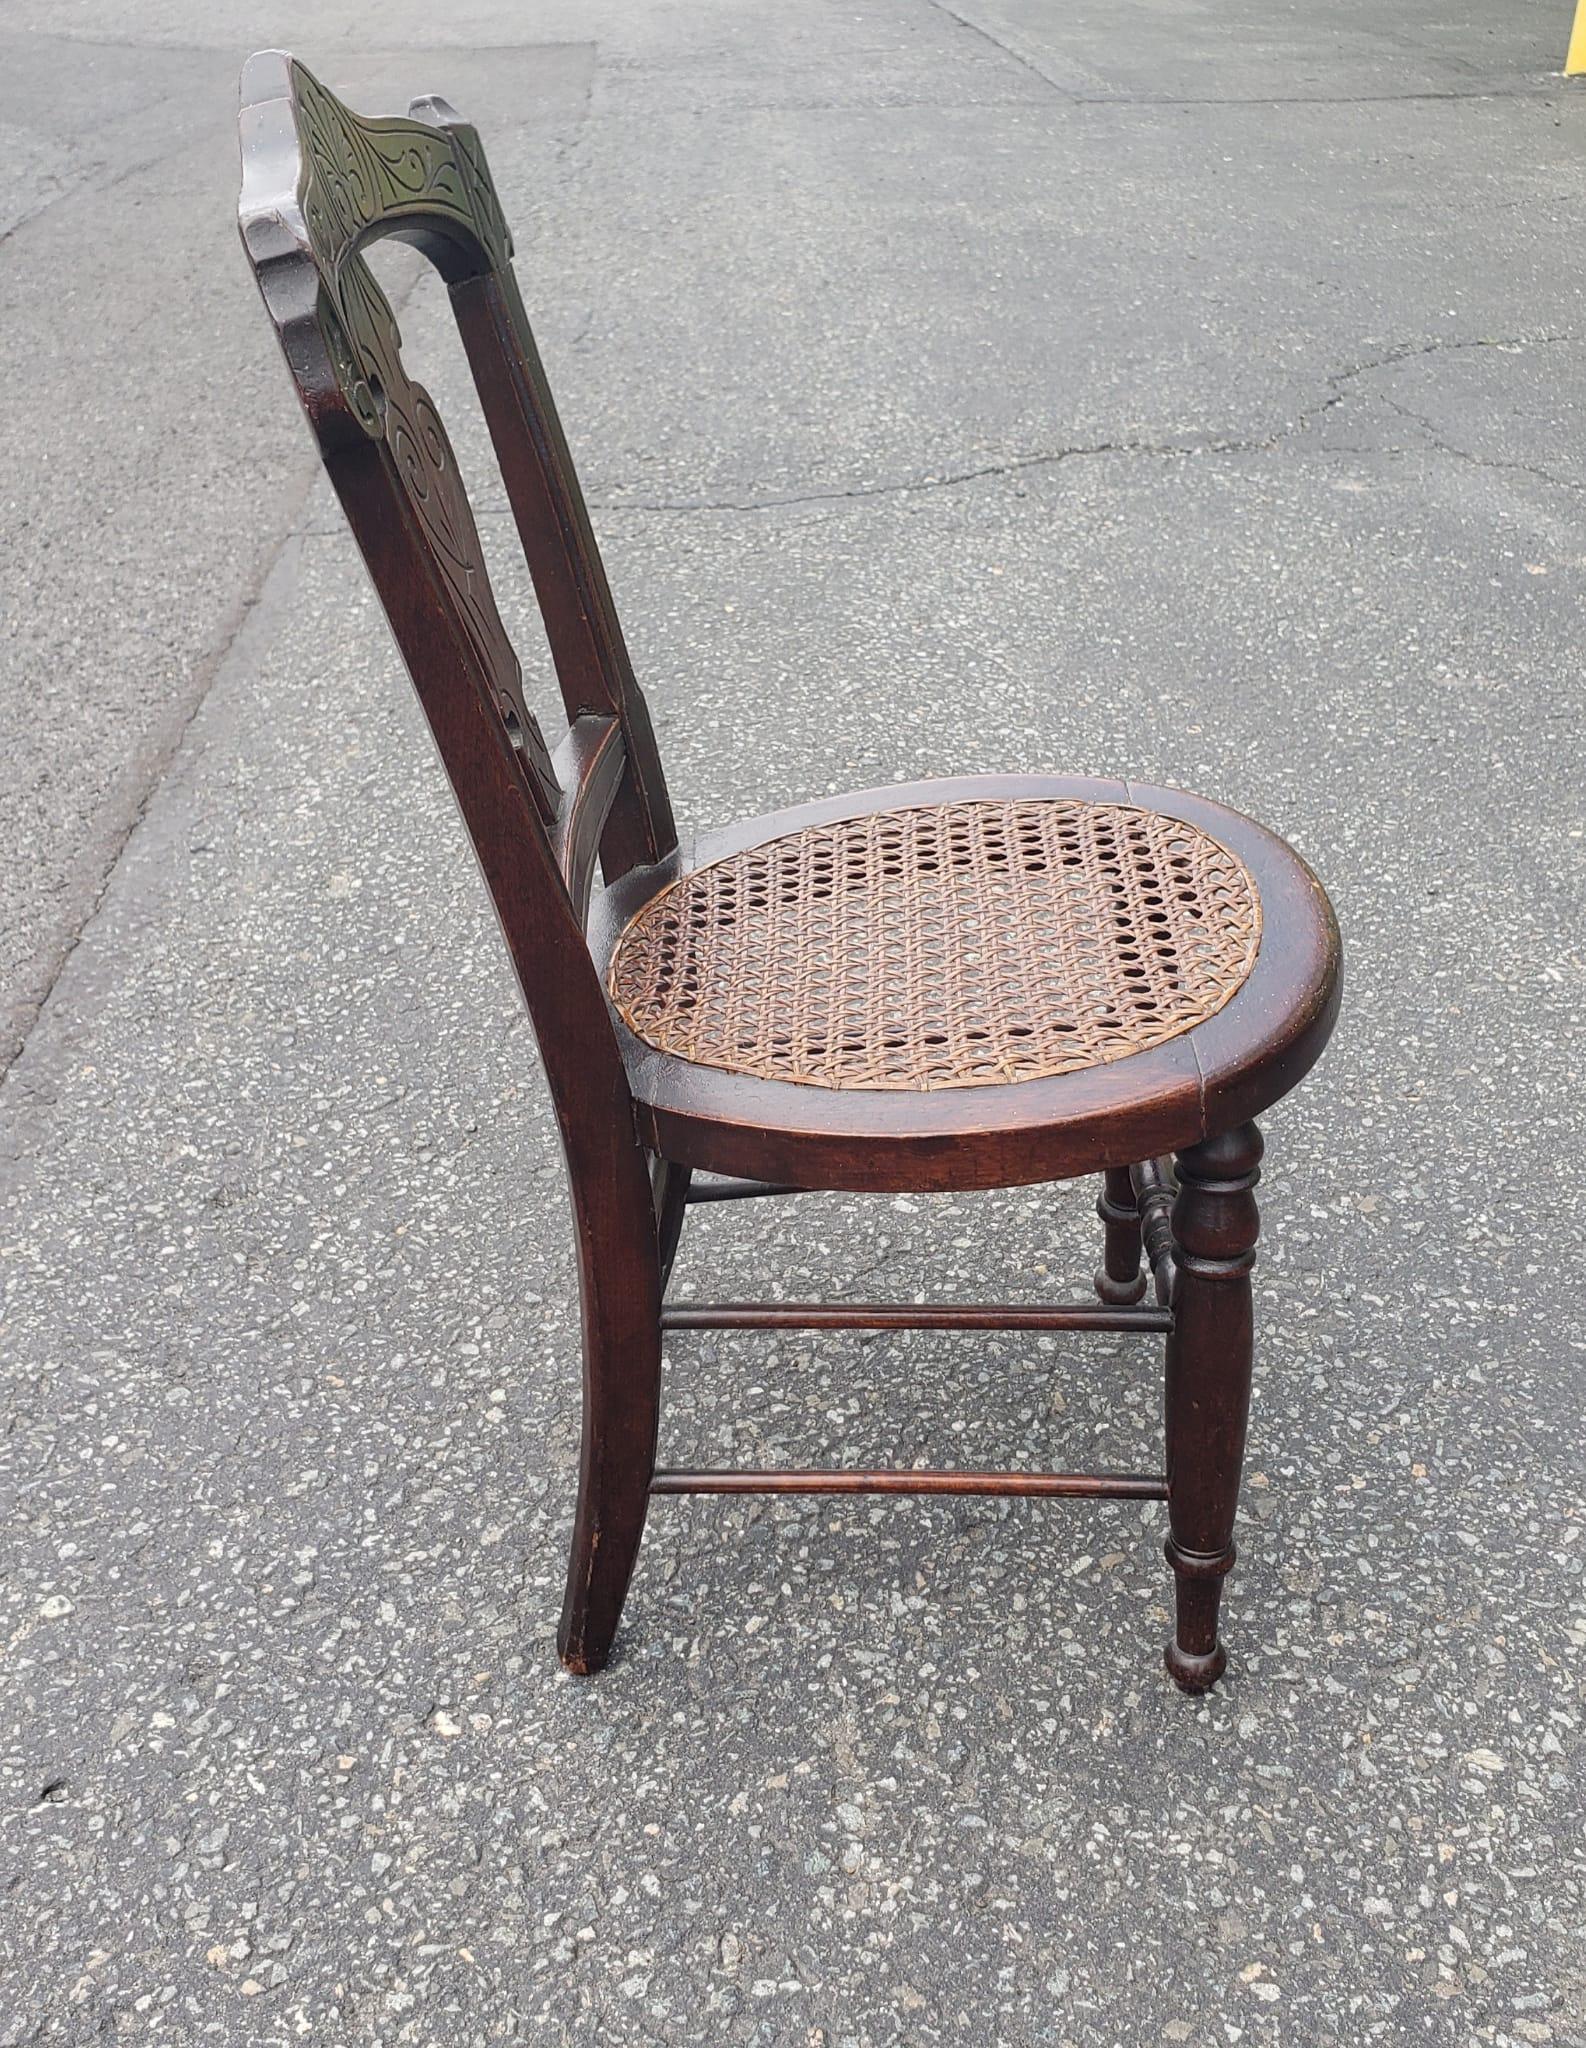 Victorian Style Carved Walnut and Cane Seat Youth Chair In Good Condition For Sale In Germantown, MD